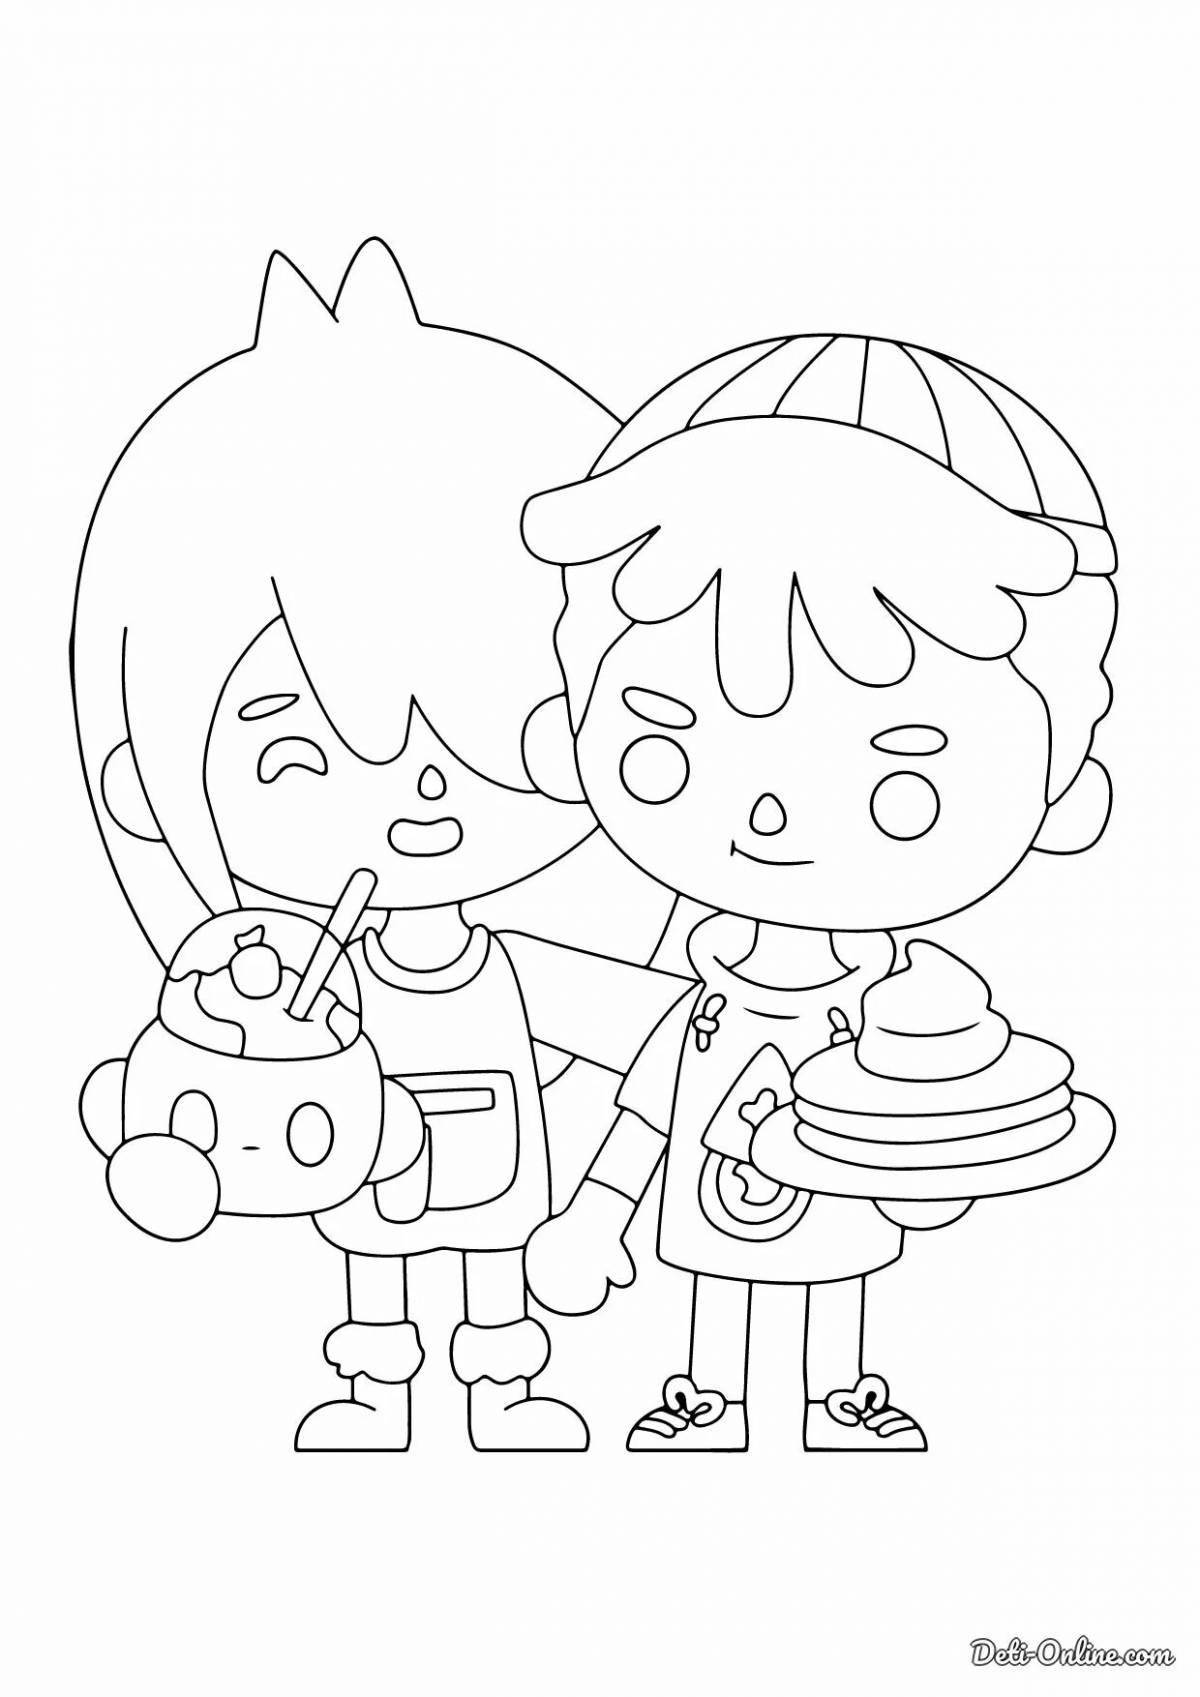 Radiant coloring page of toko boko characters